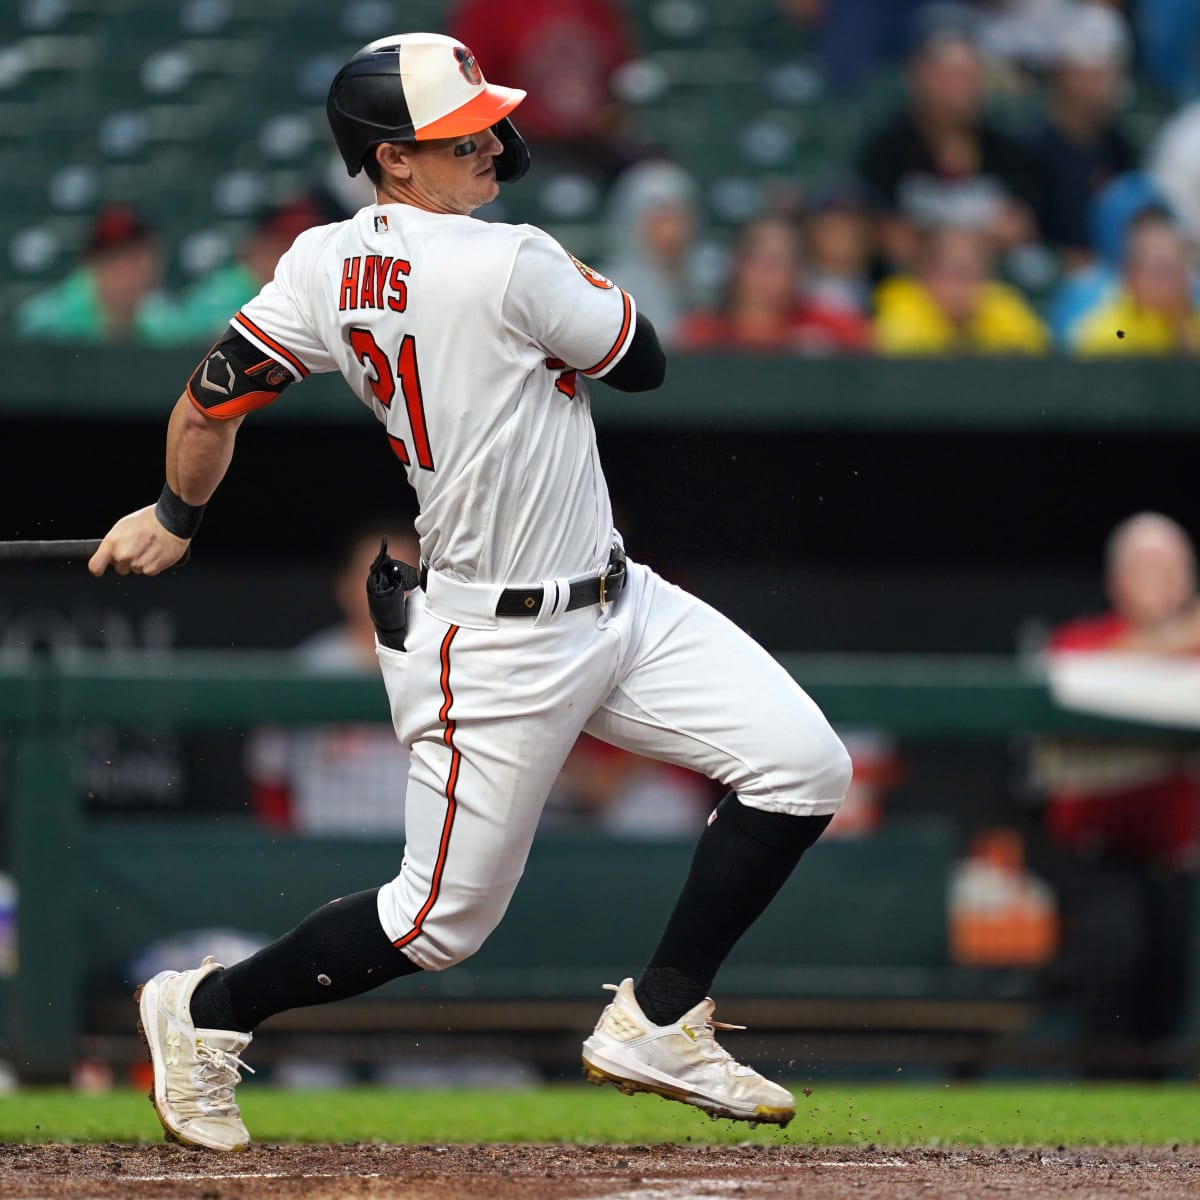 With bat and glove, Urías leads Orioles over Yankees 7-6